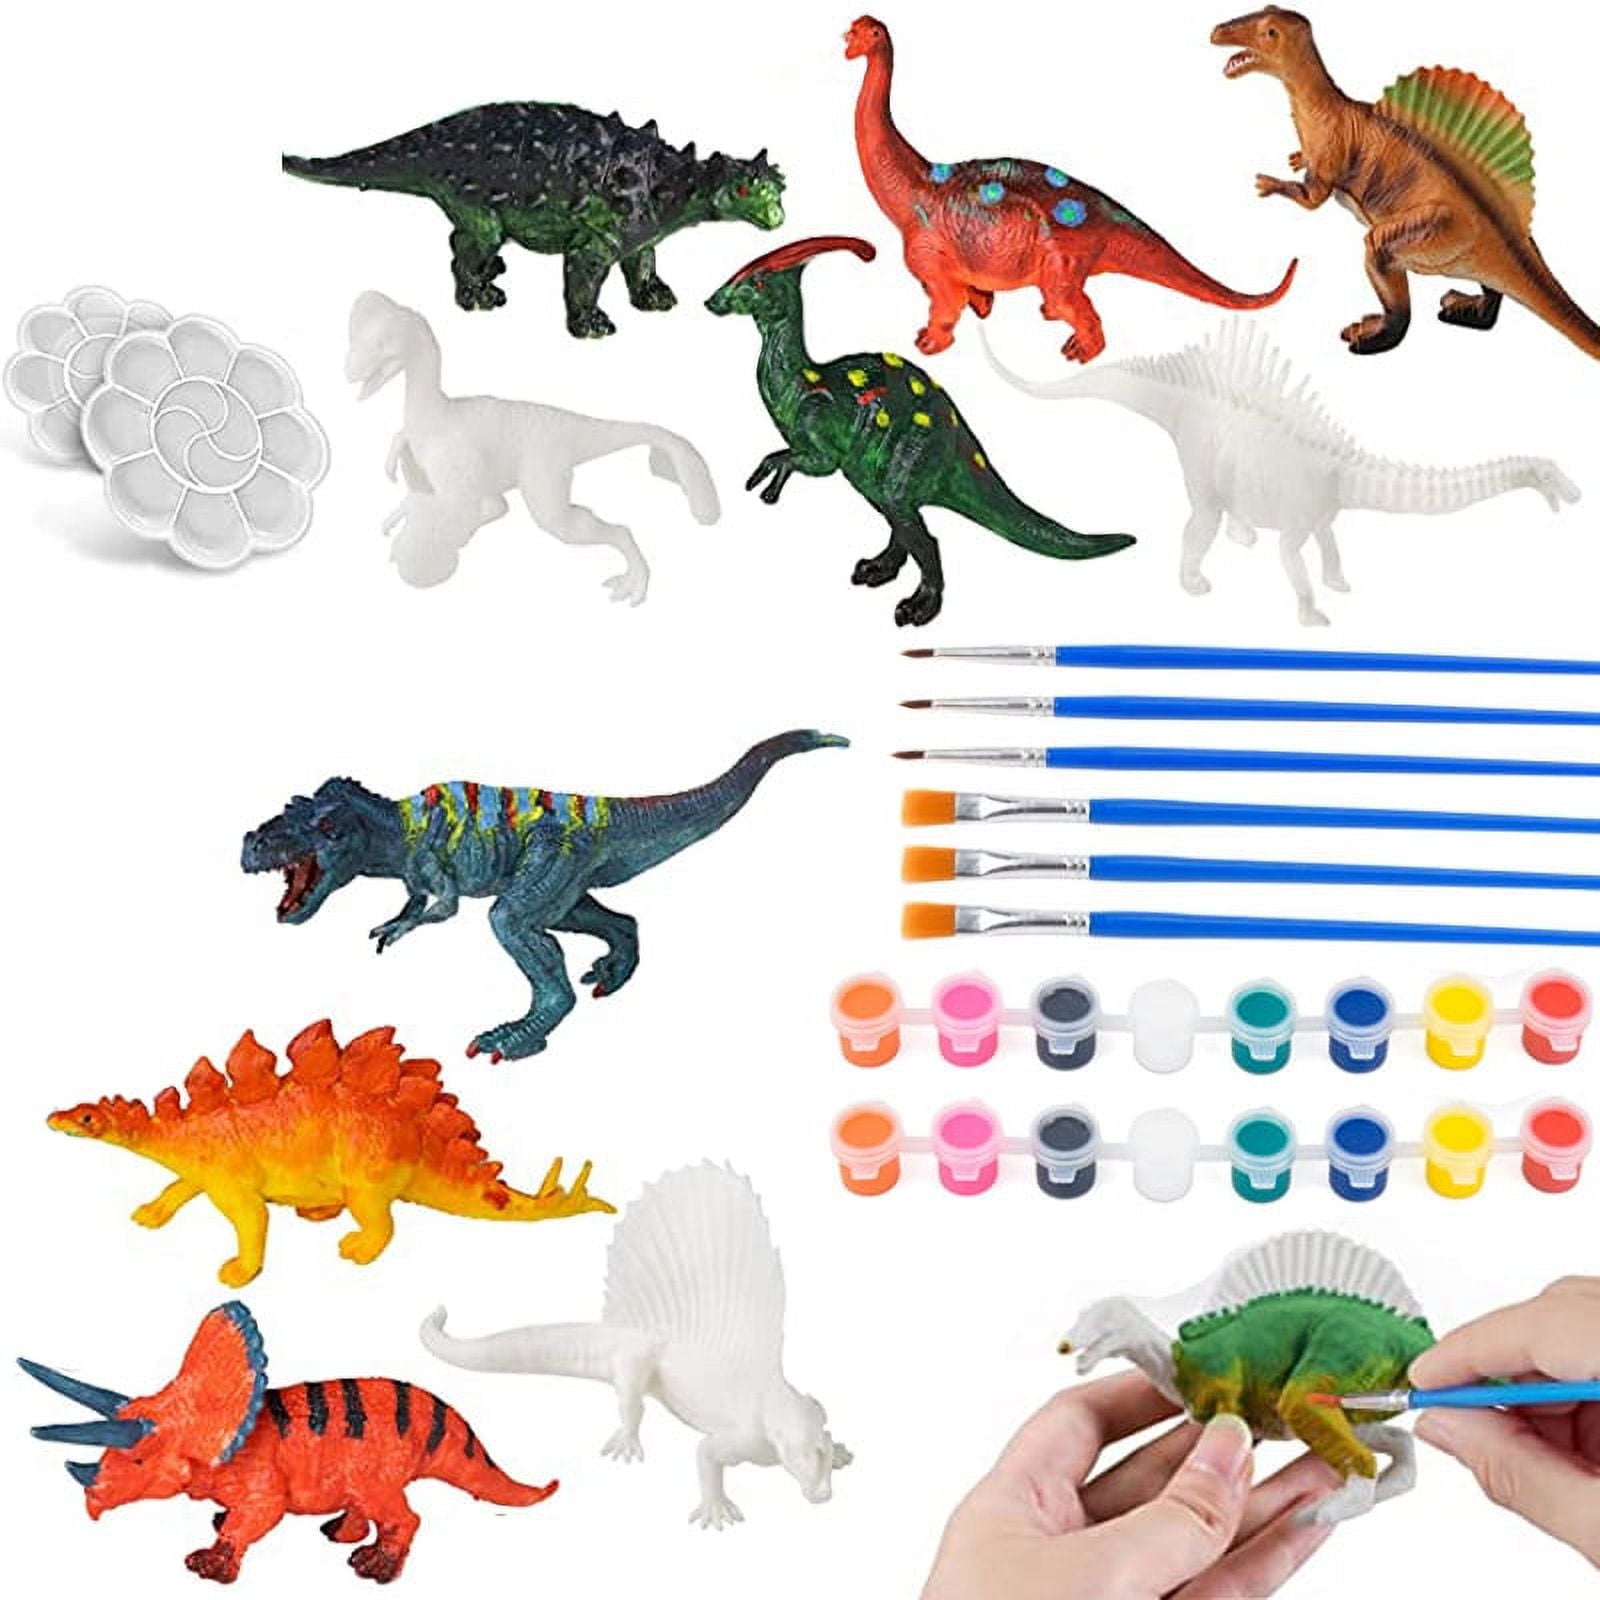 Dinosaur Painting Kit for Kids – 13-Piece Kids Arts and Crafts Set